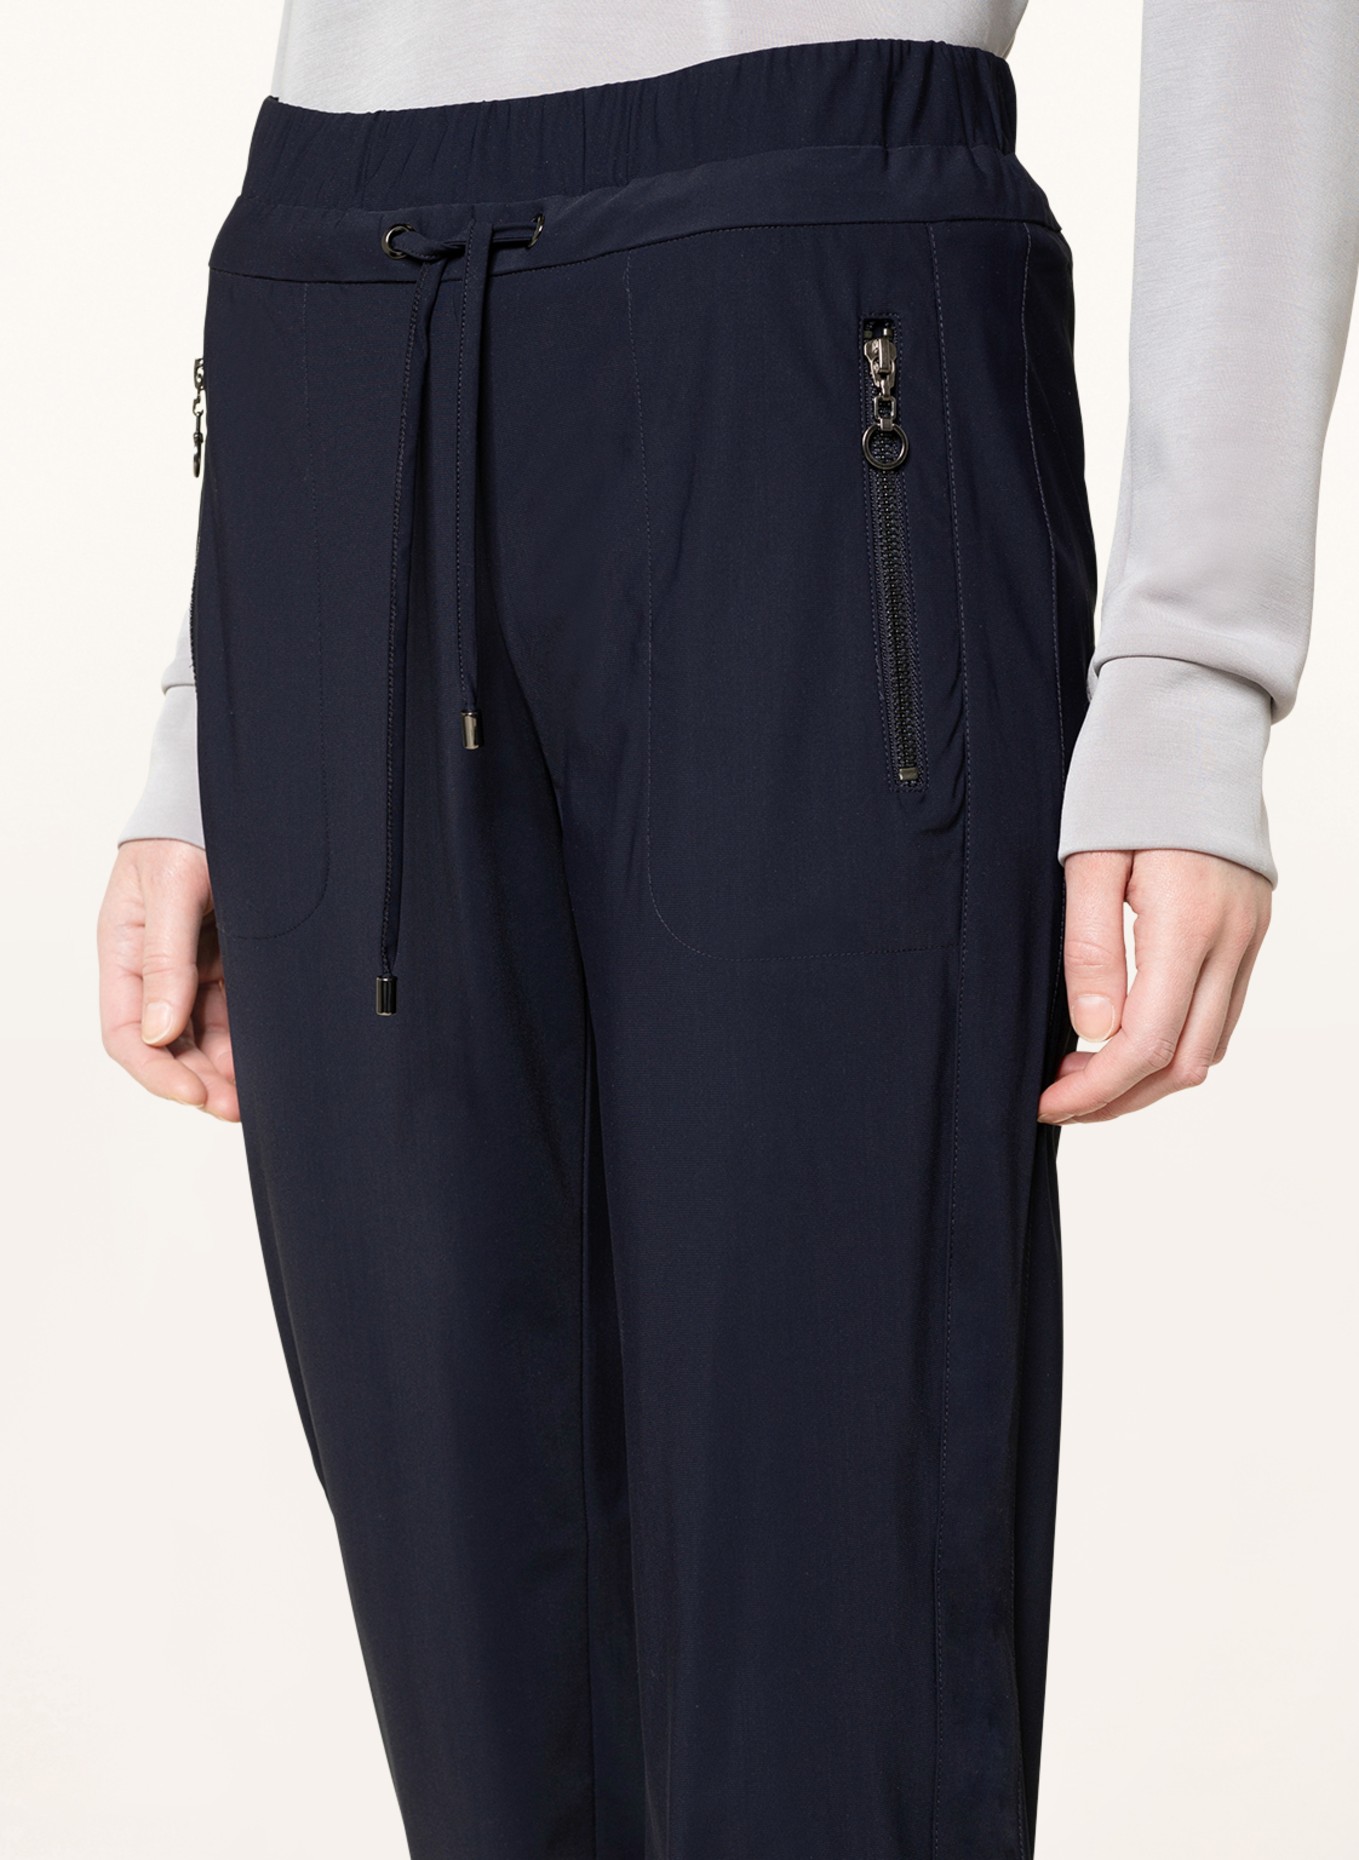 s.Oliver BLACK LABEL Trousers in jogger style, Color: DARK BLUE (Image 5)